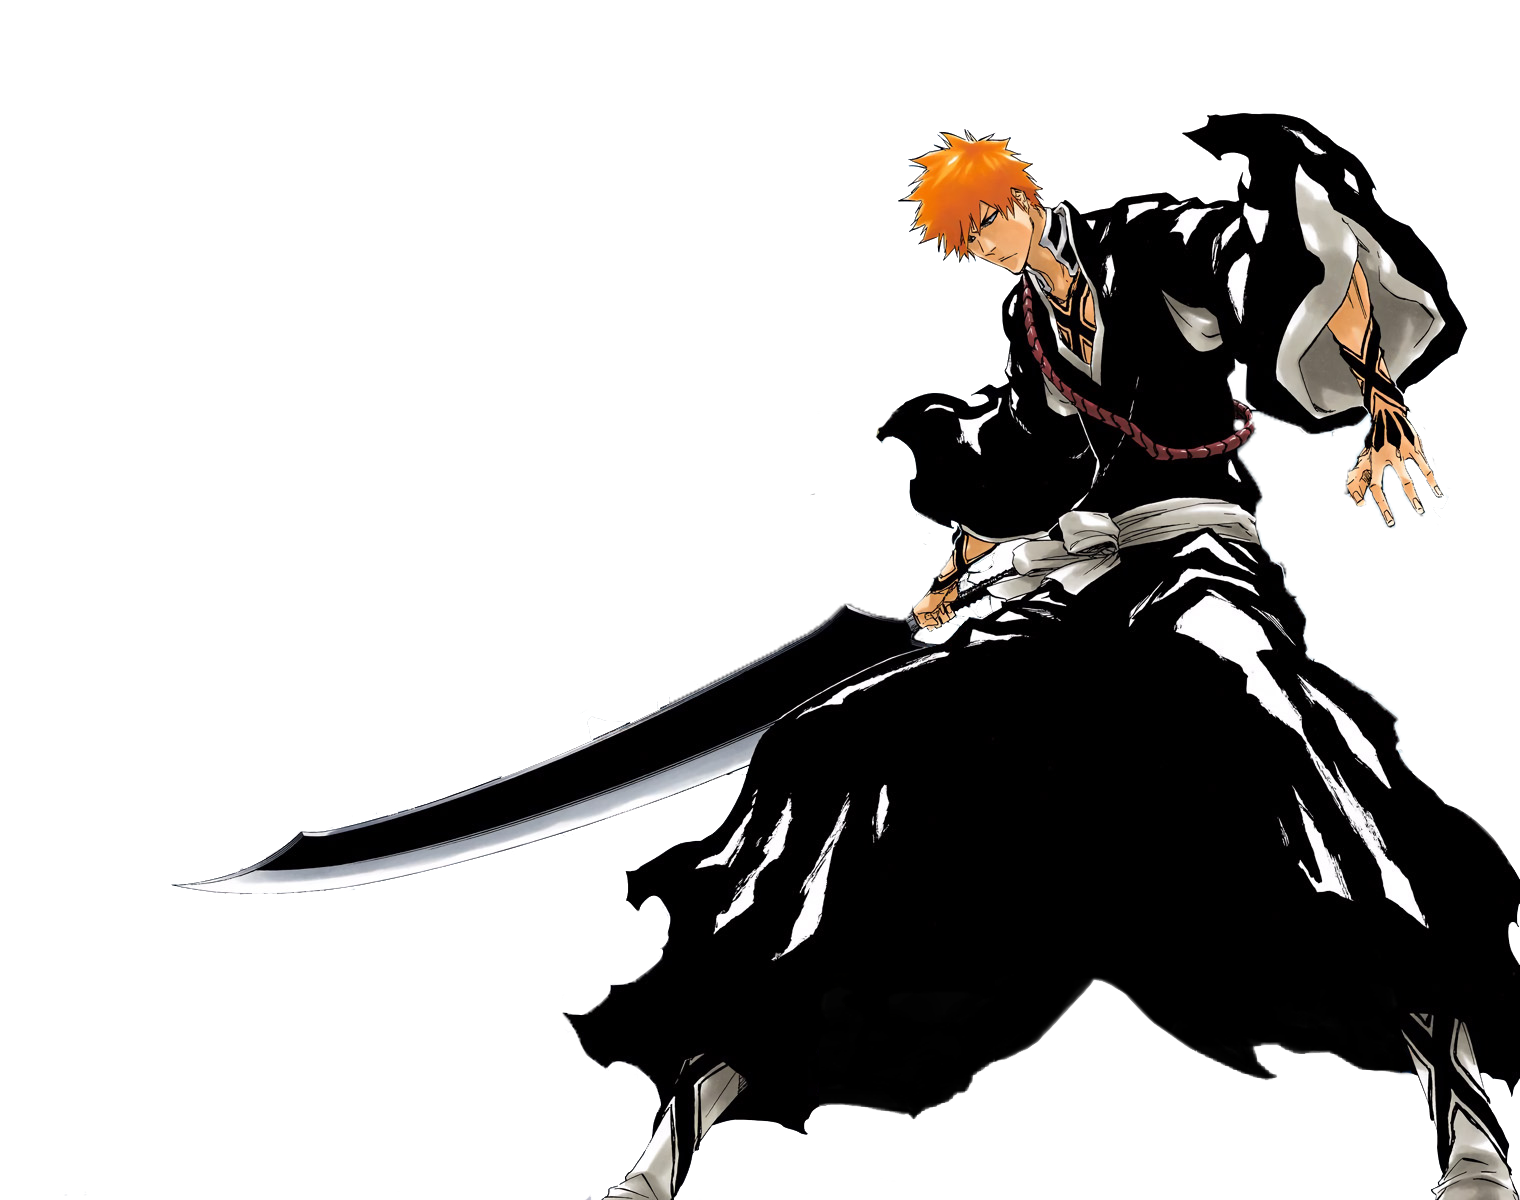 ichigo fullbring stage 2 from alpha zero - hosted by Neoseeker